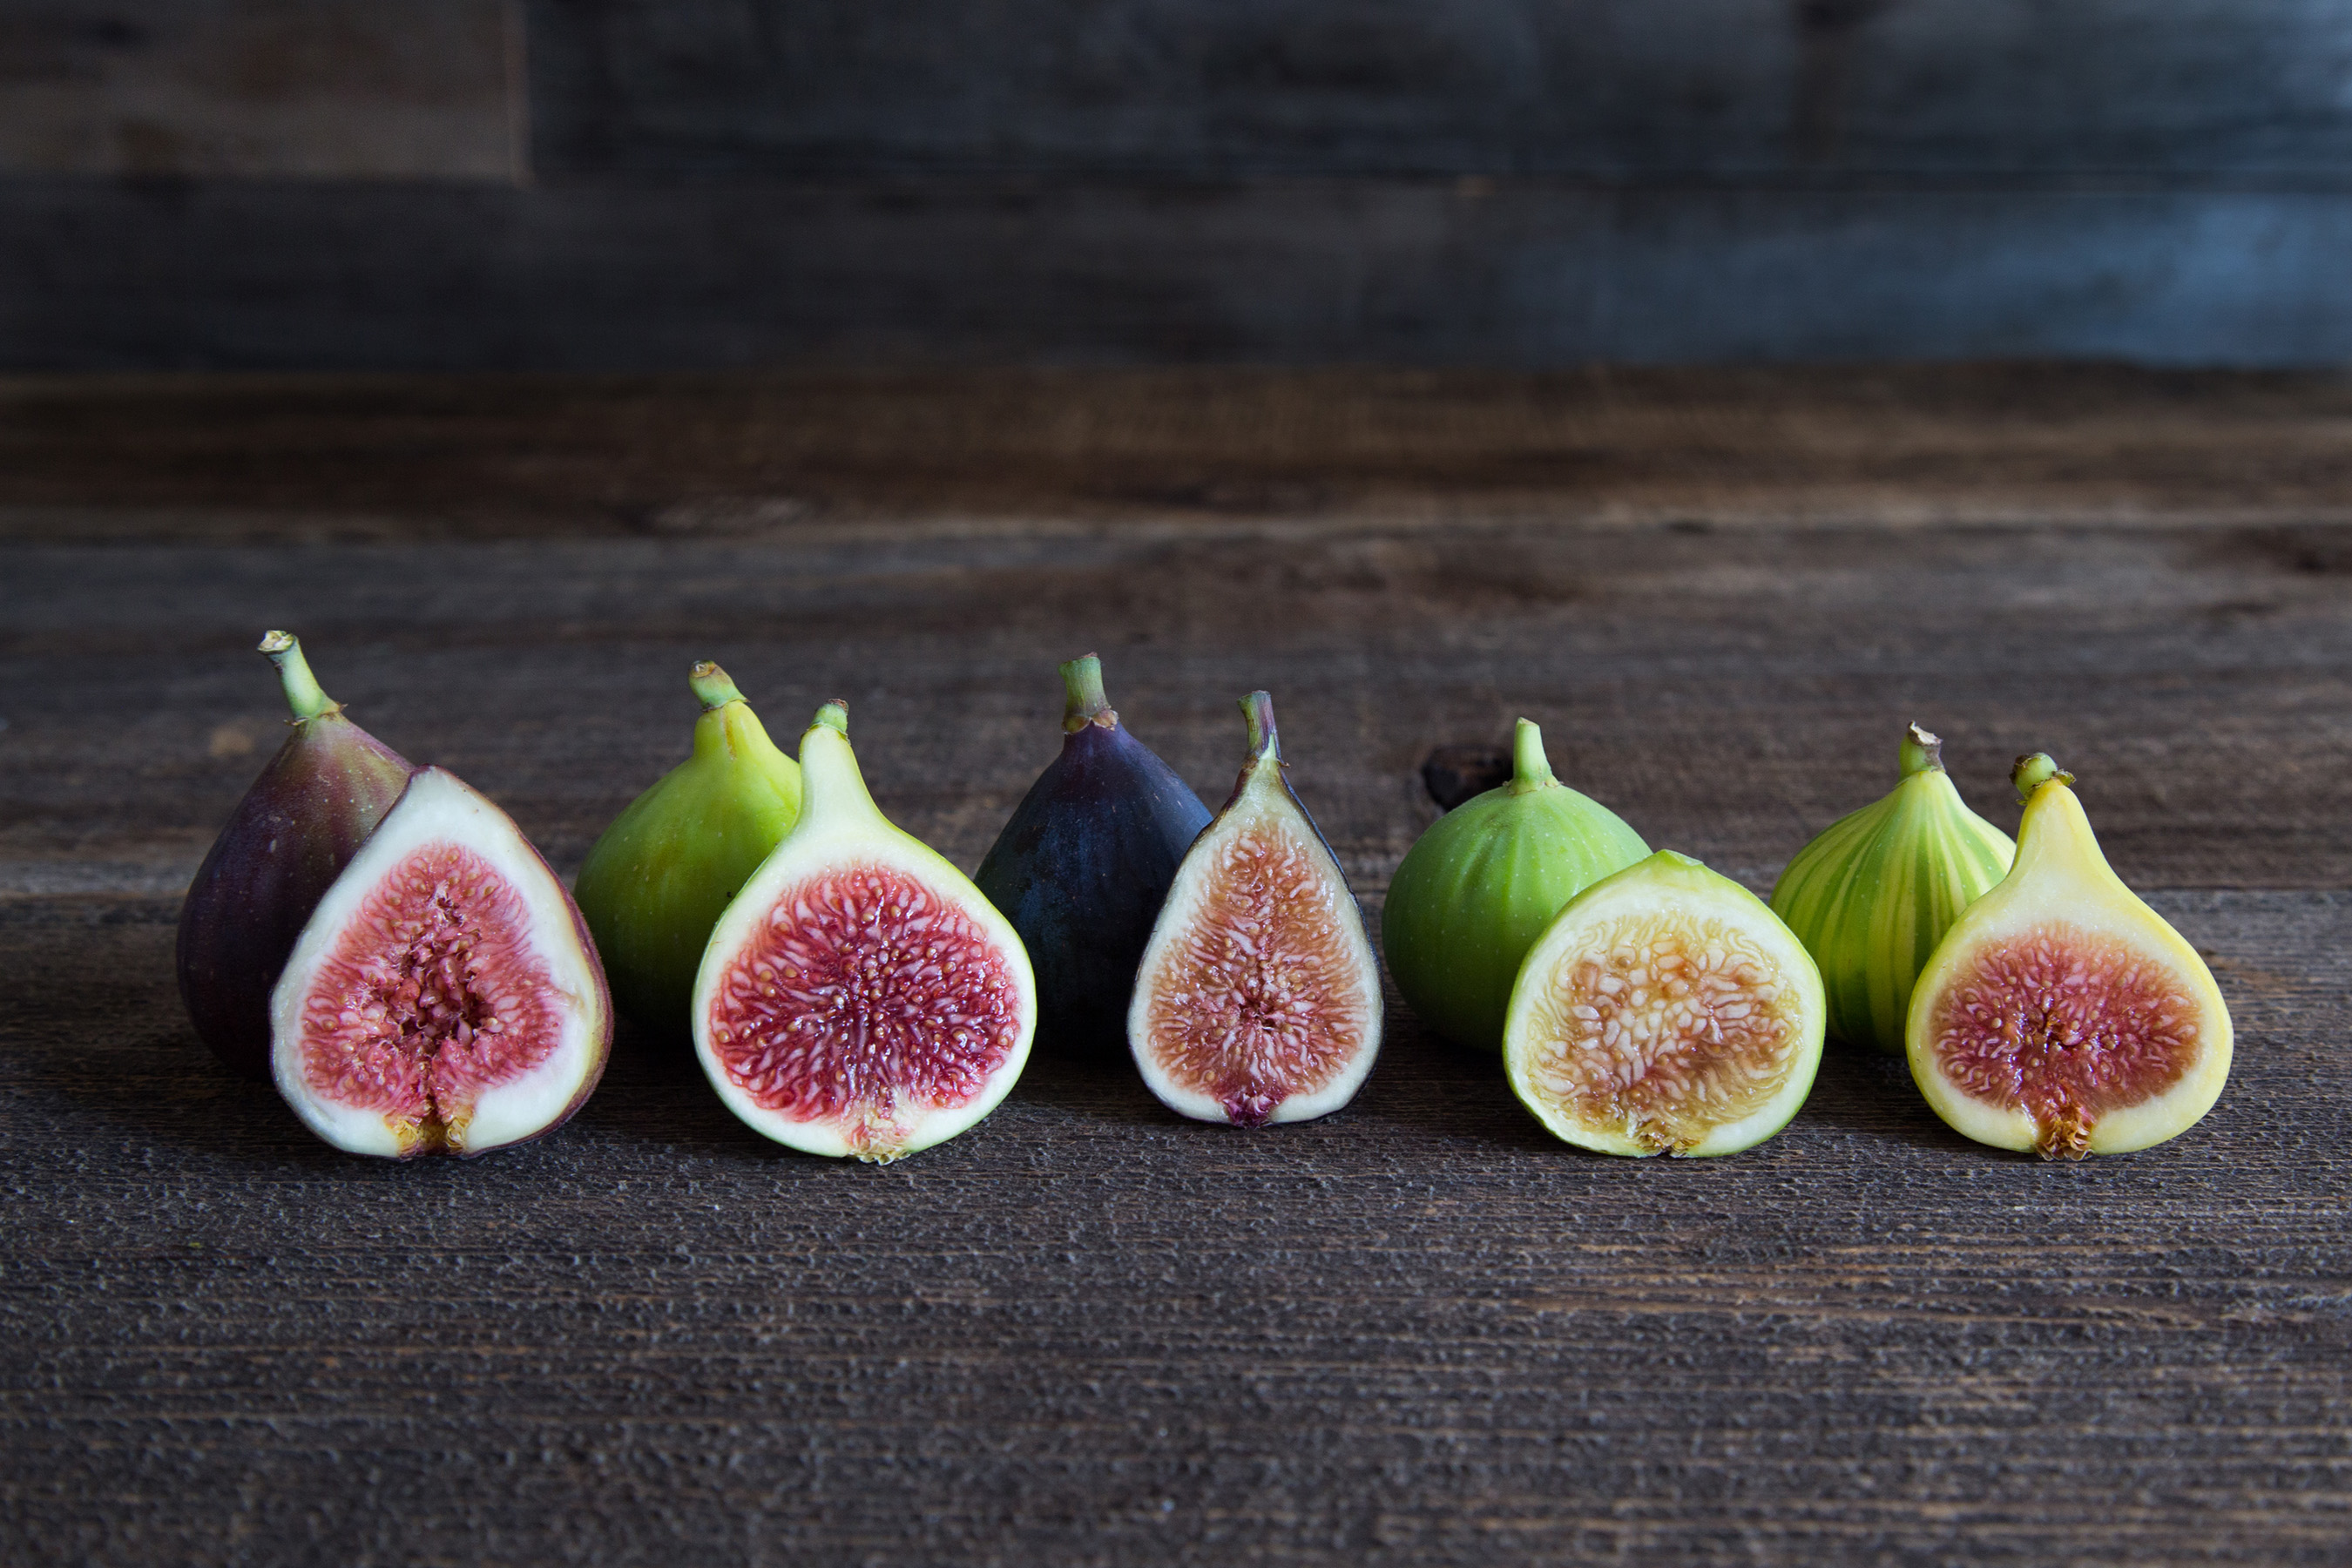 There are five primary types of California Fresh Figs (from left to right): Brown Turkey, Kadota, Mission, Sierra and Tiger.